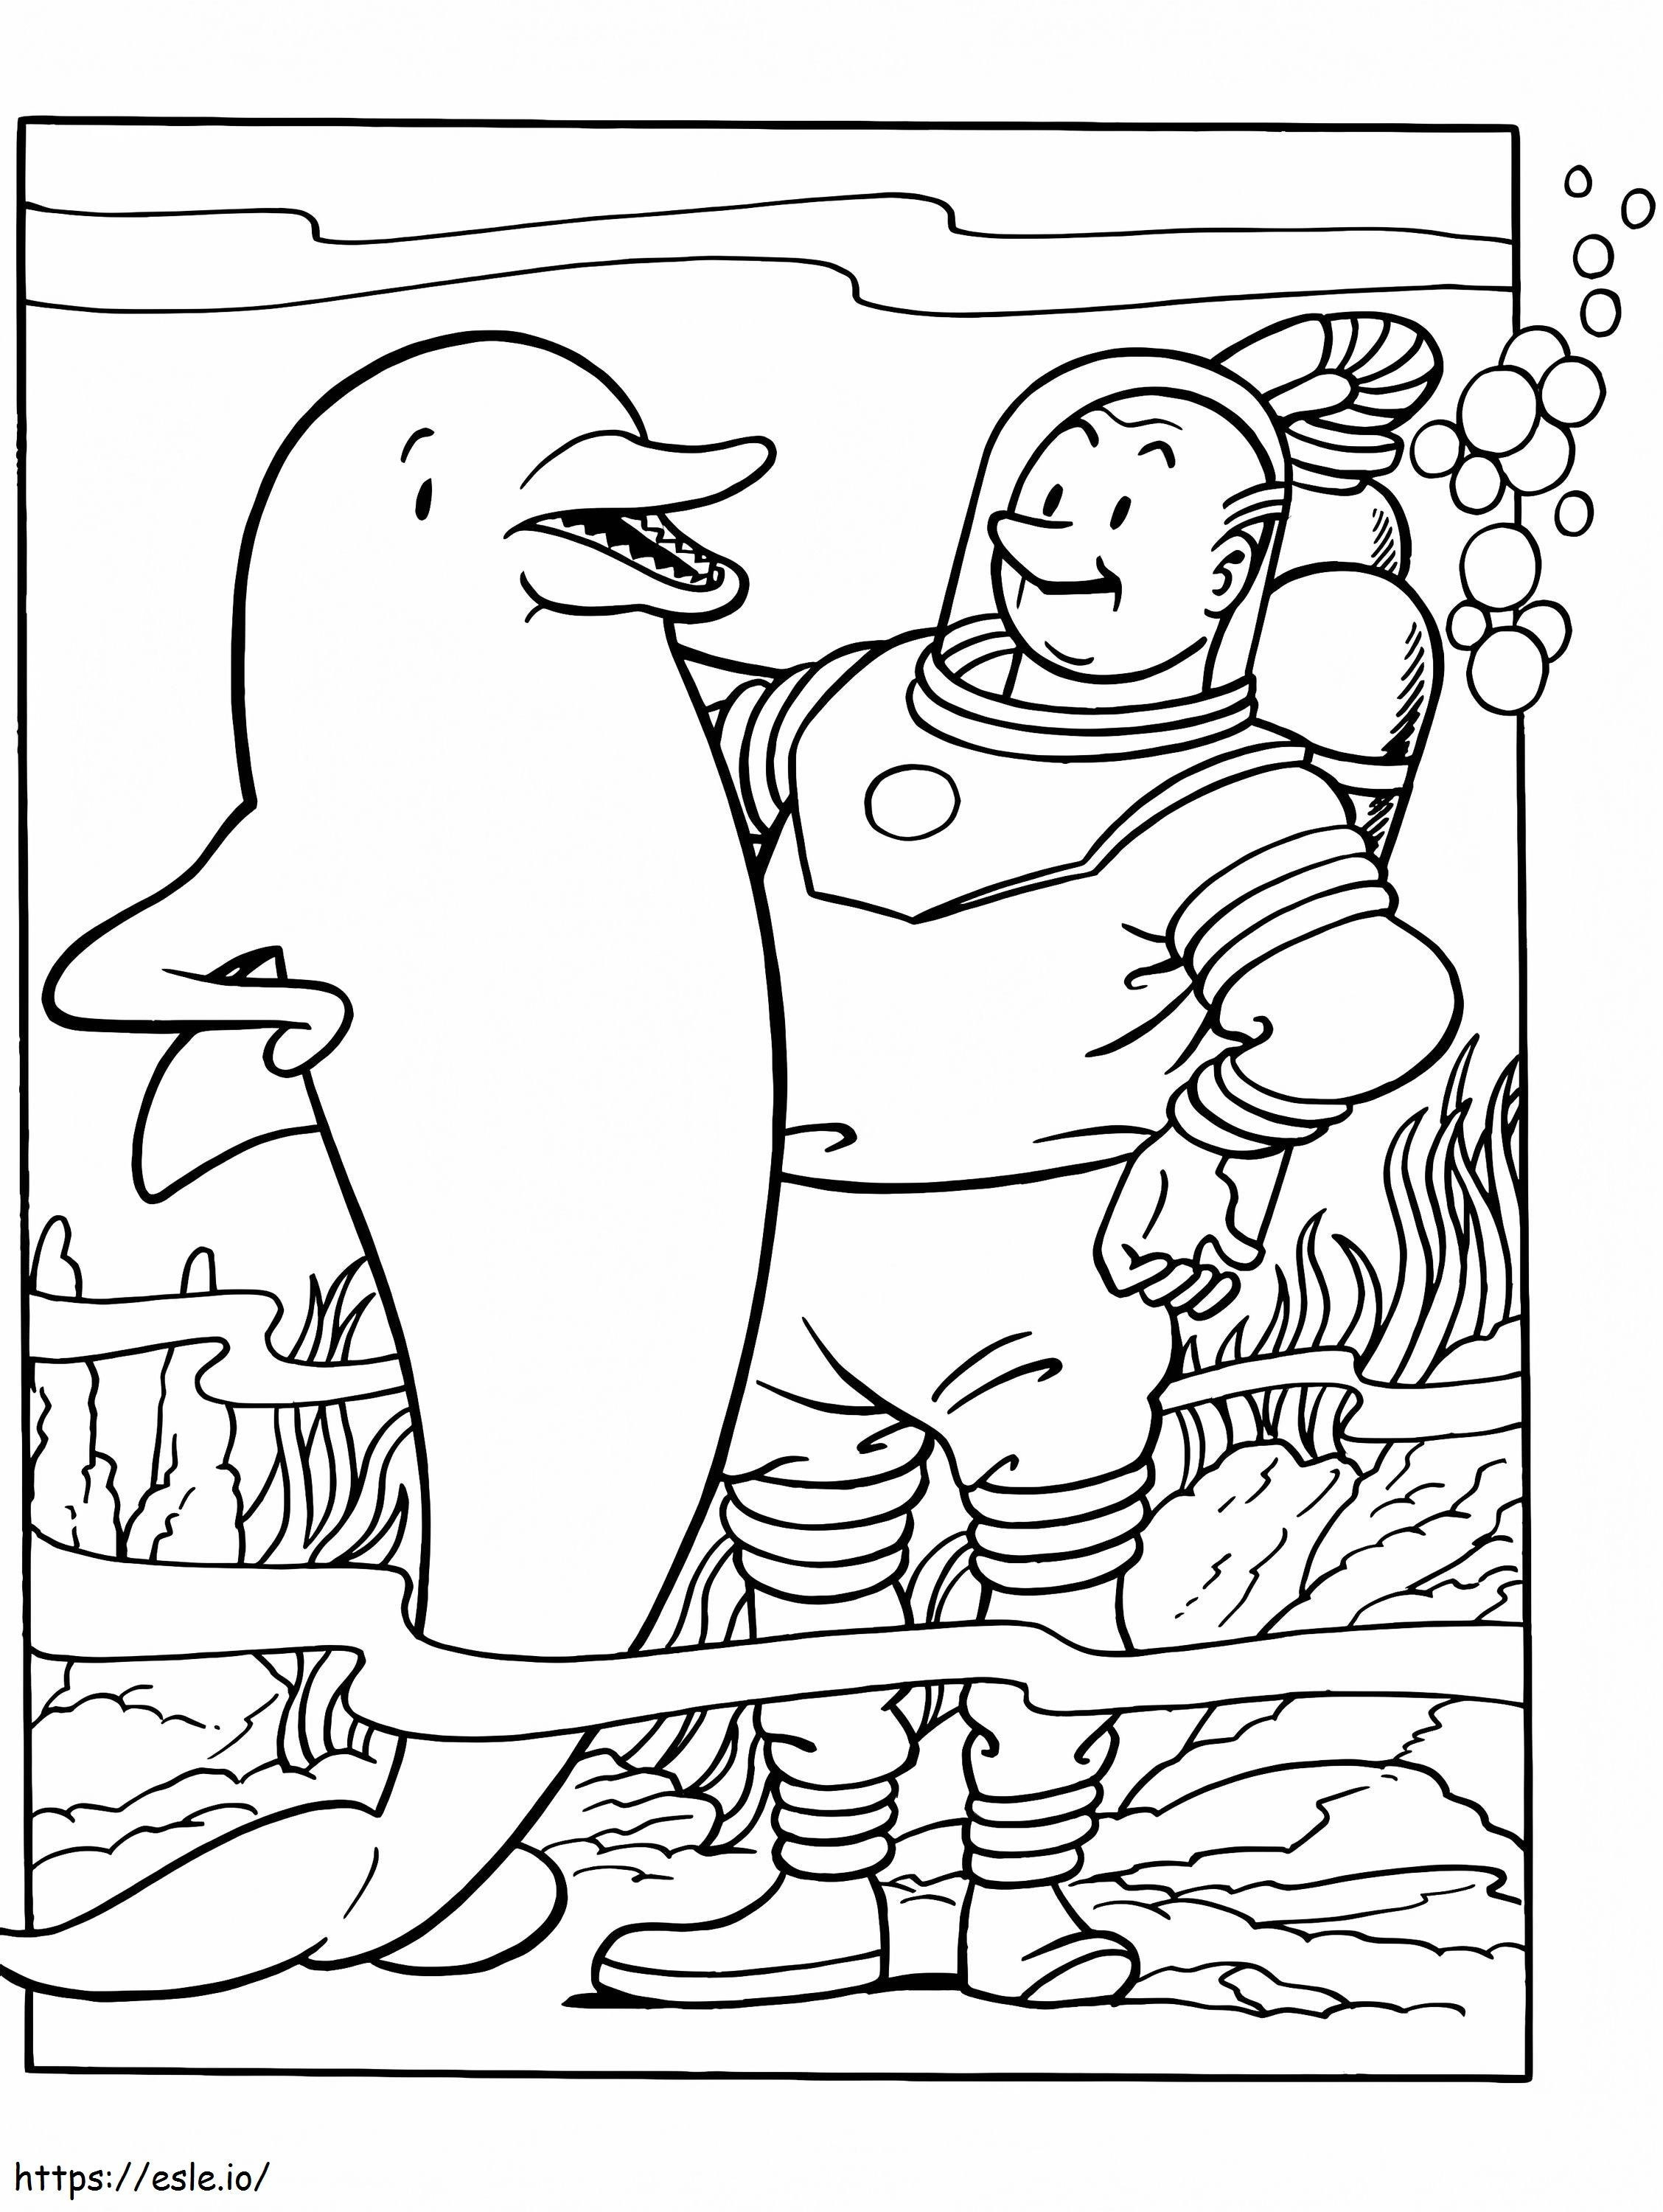 Spike And Suzy 2 coloring page